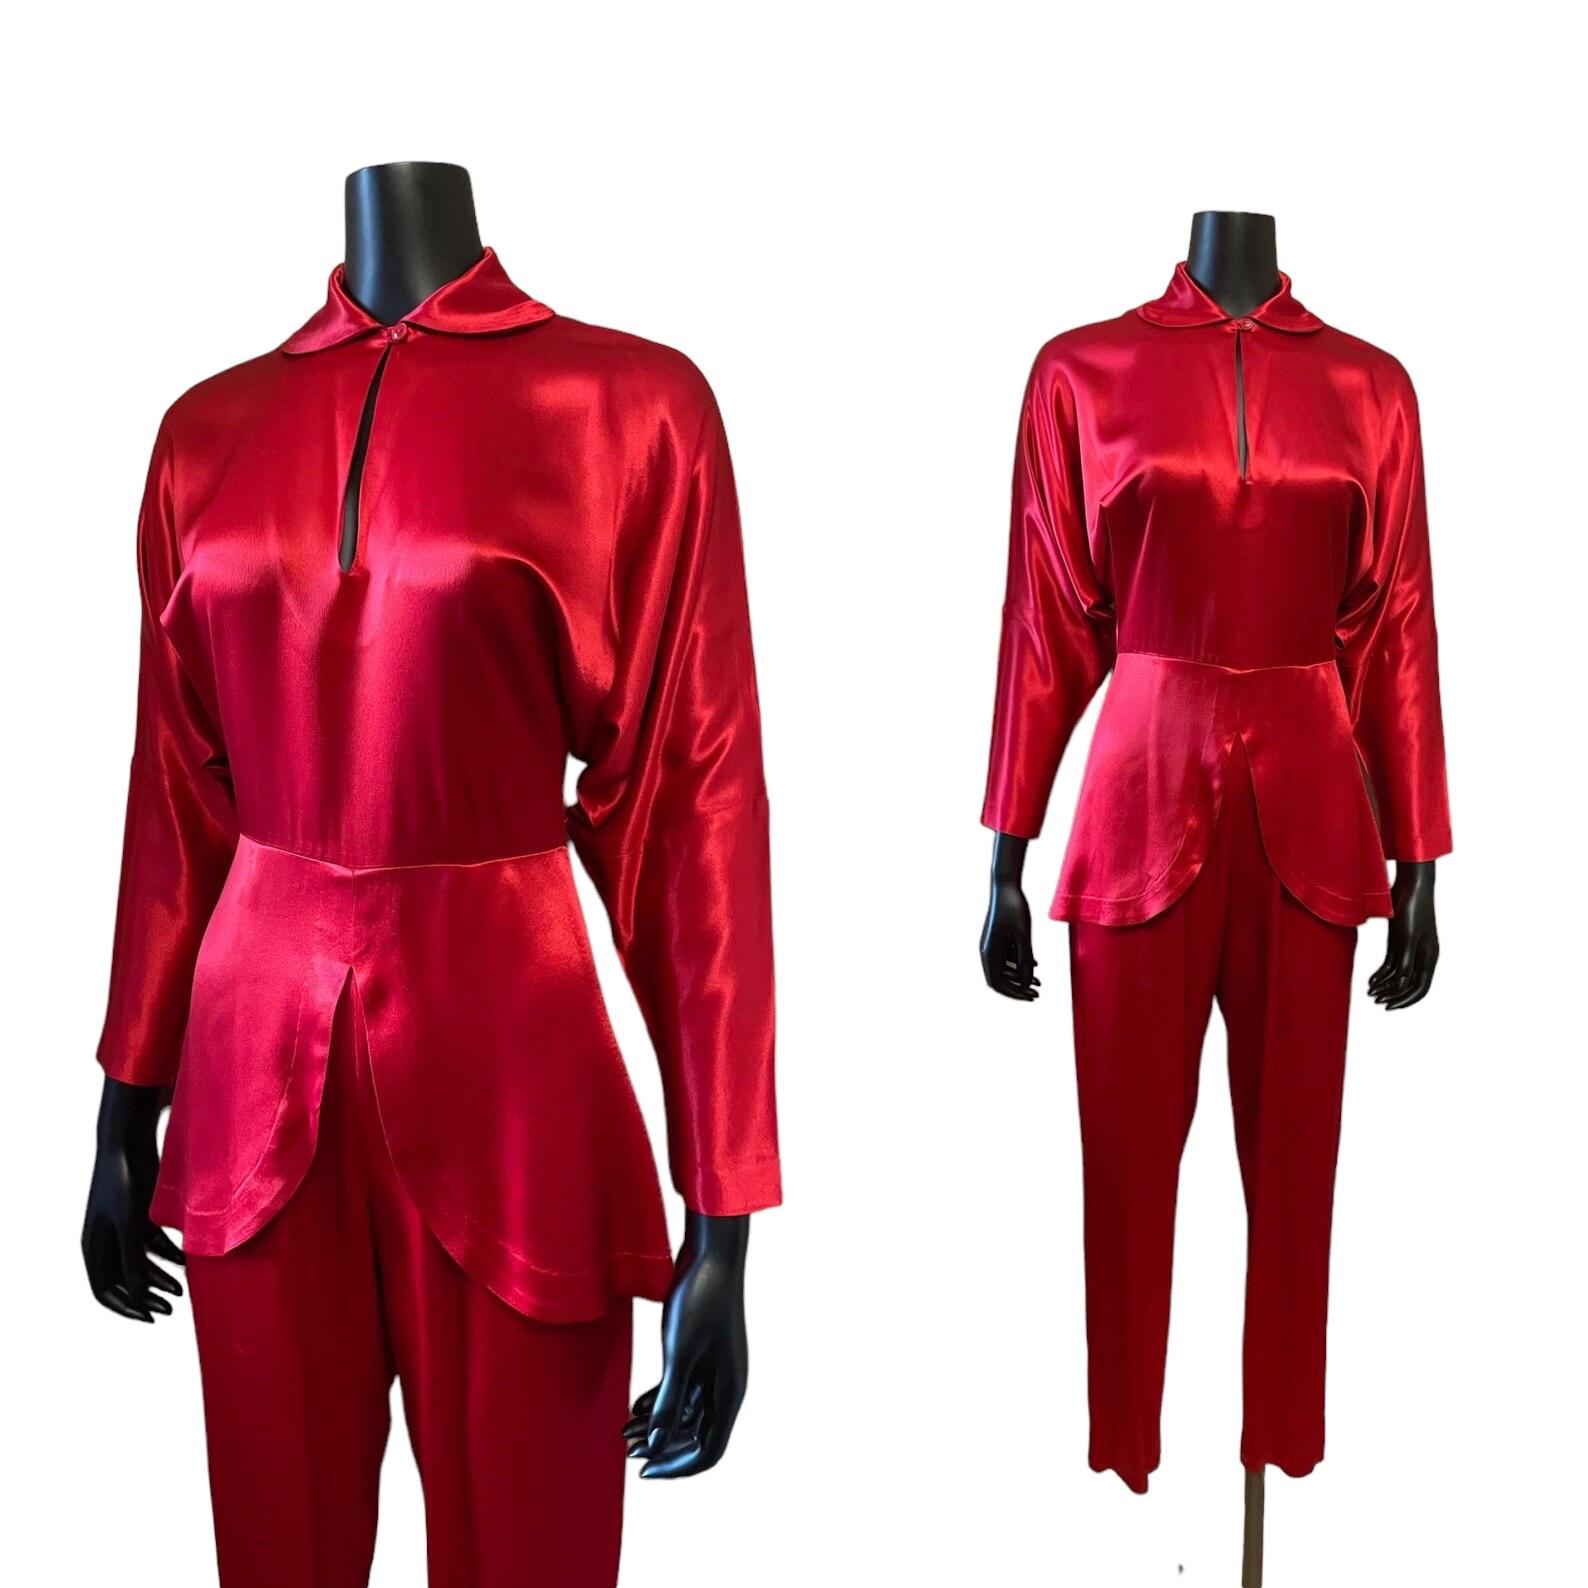 Norma Kamali lipstick red jumpsuit
Drop shoulders, batwing long sleeves
Peter pan collar with button closure
Key hole neckline
Peplum waist
Tapered leg
Back zip closure

Circa 1980s
Norma Kamali
Made in USA
Tagged Size 4
Red
Satin 
Excellent